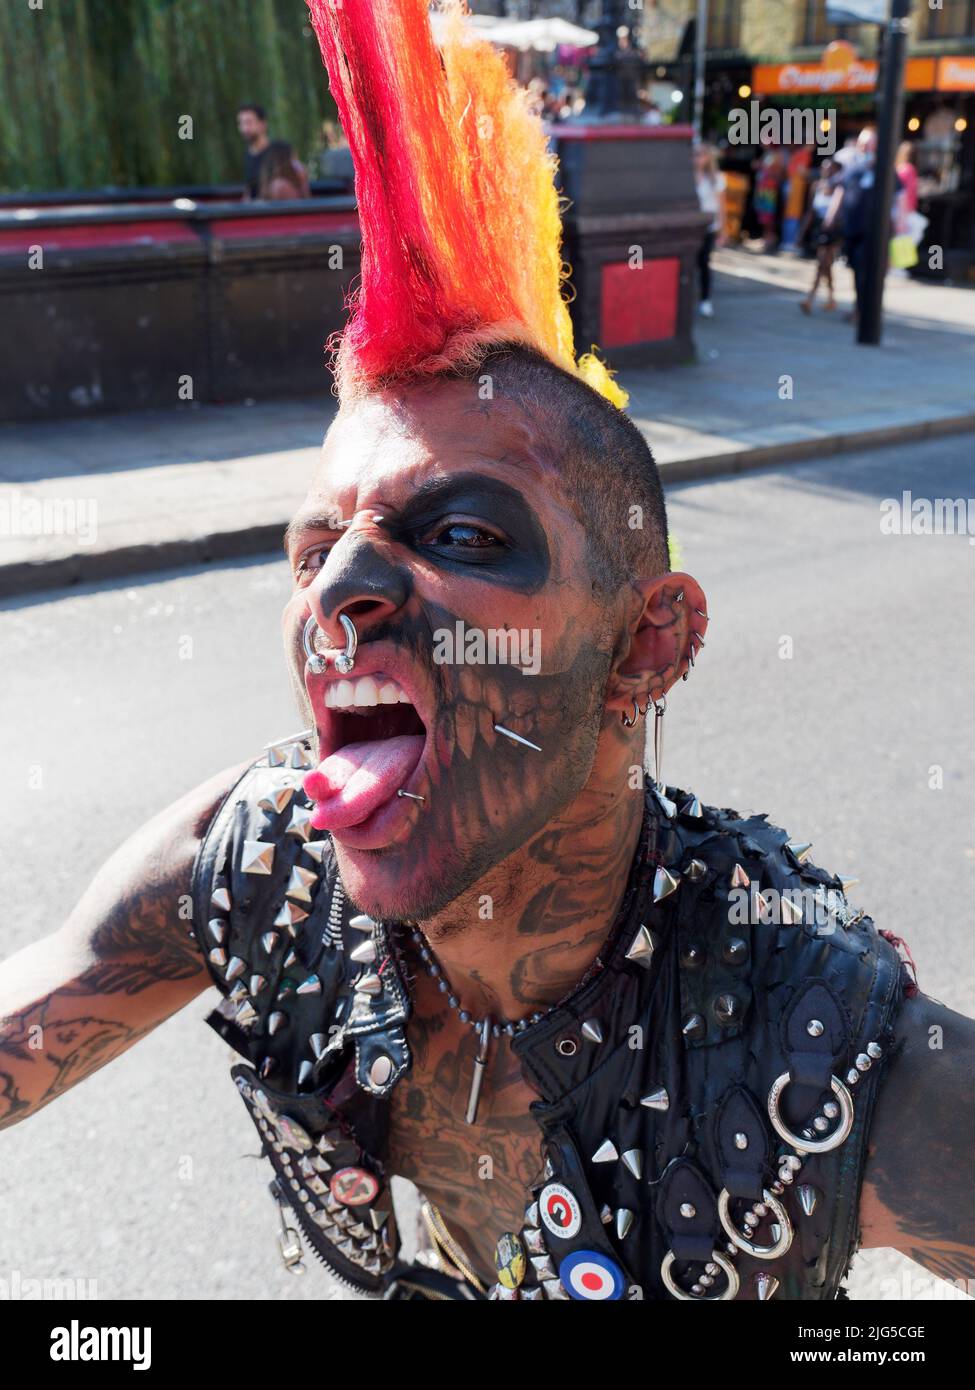 Close-up photo of Zombiepunk one of Camden's punks on Lock Bridge over the Regents Canal in London Stock Photo